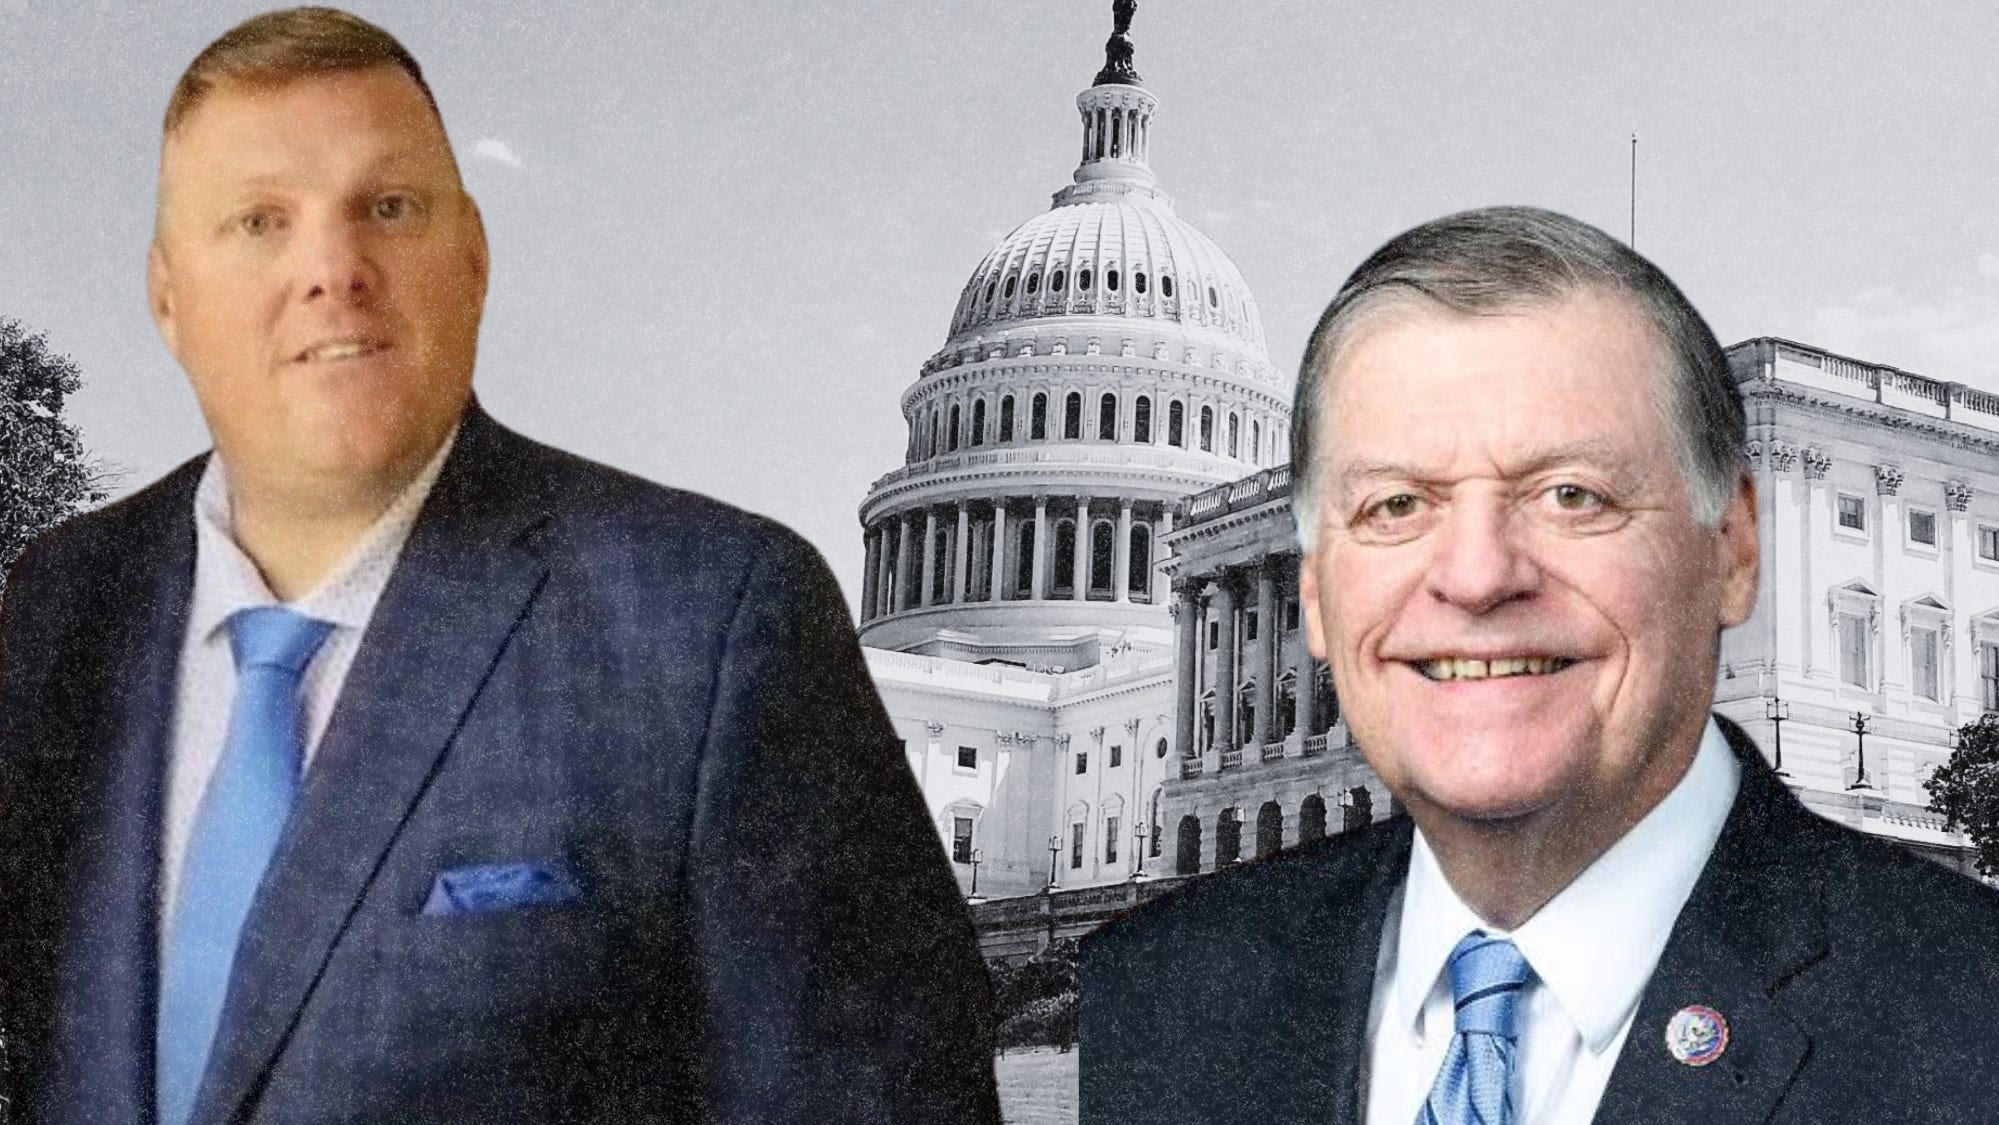 Paul Bondar vs. Tom Cole fact check: Voting history, residency and tax records